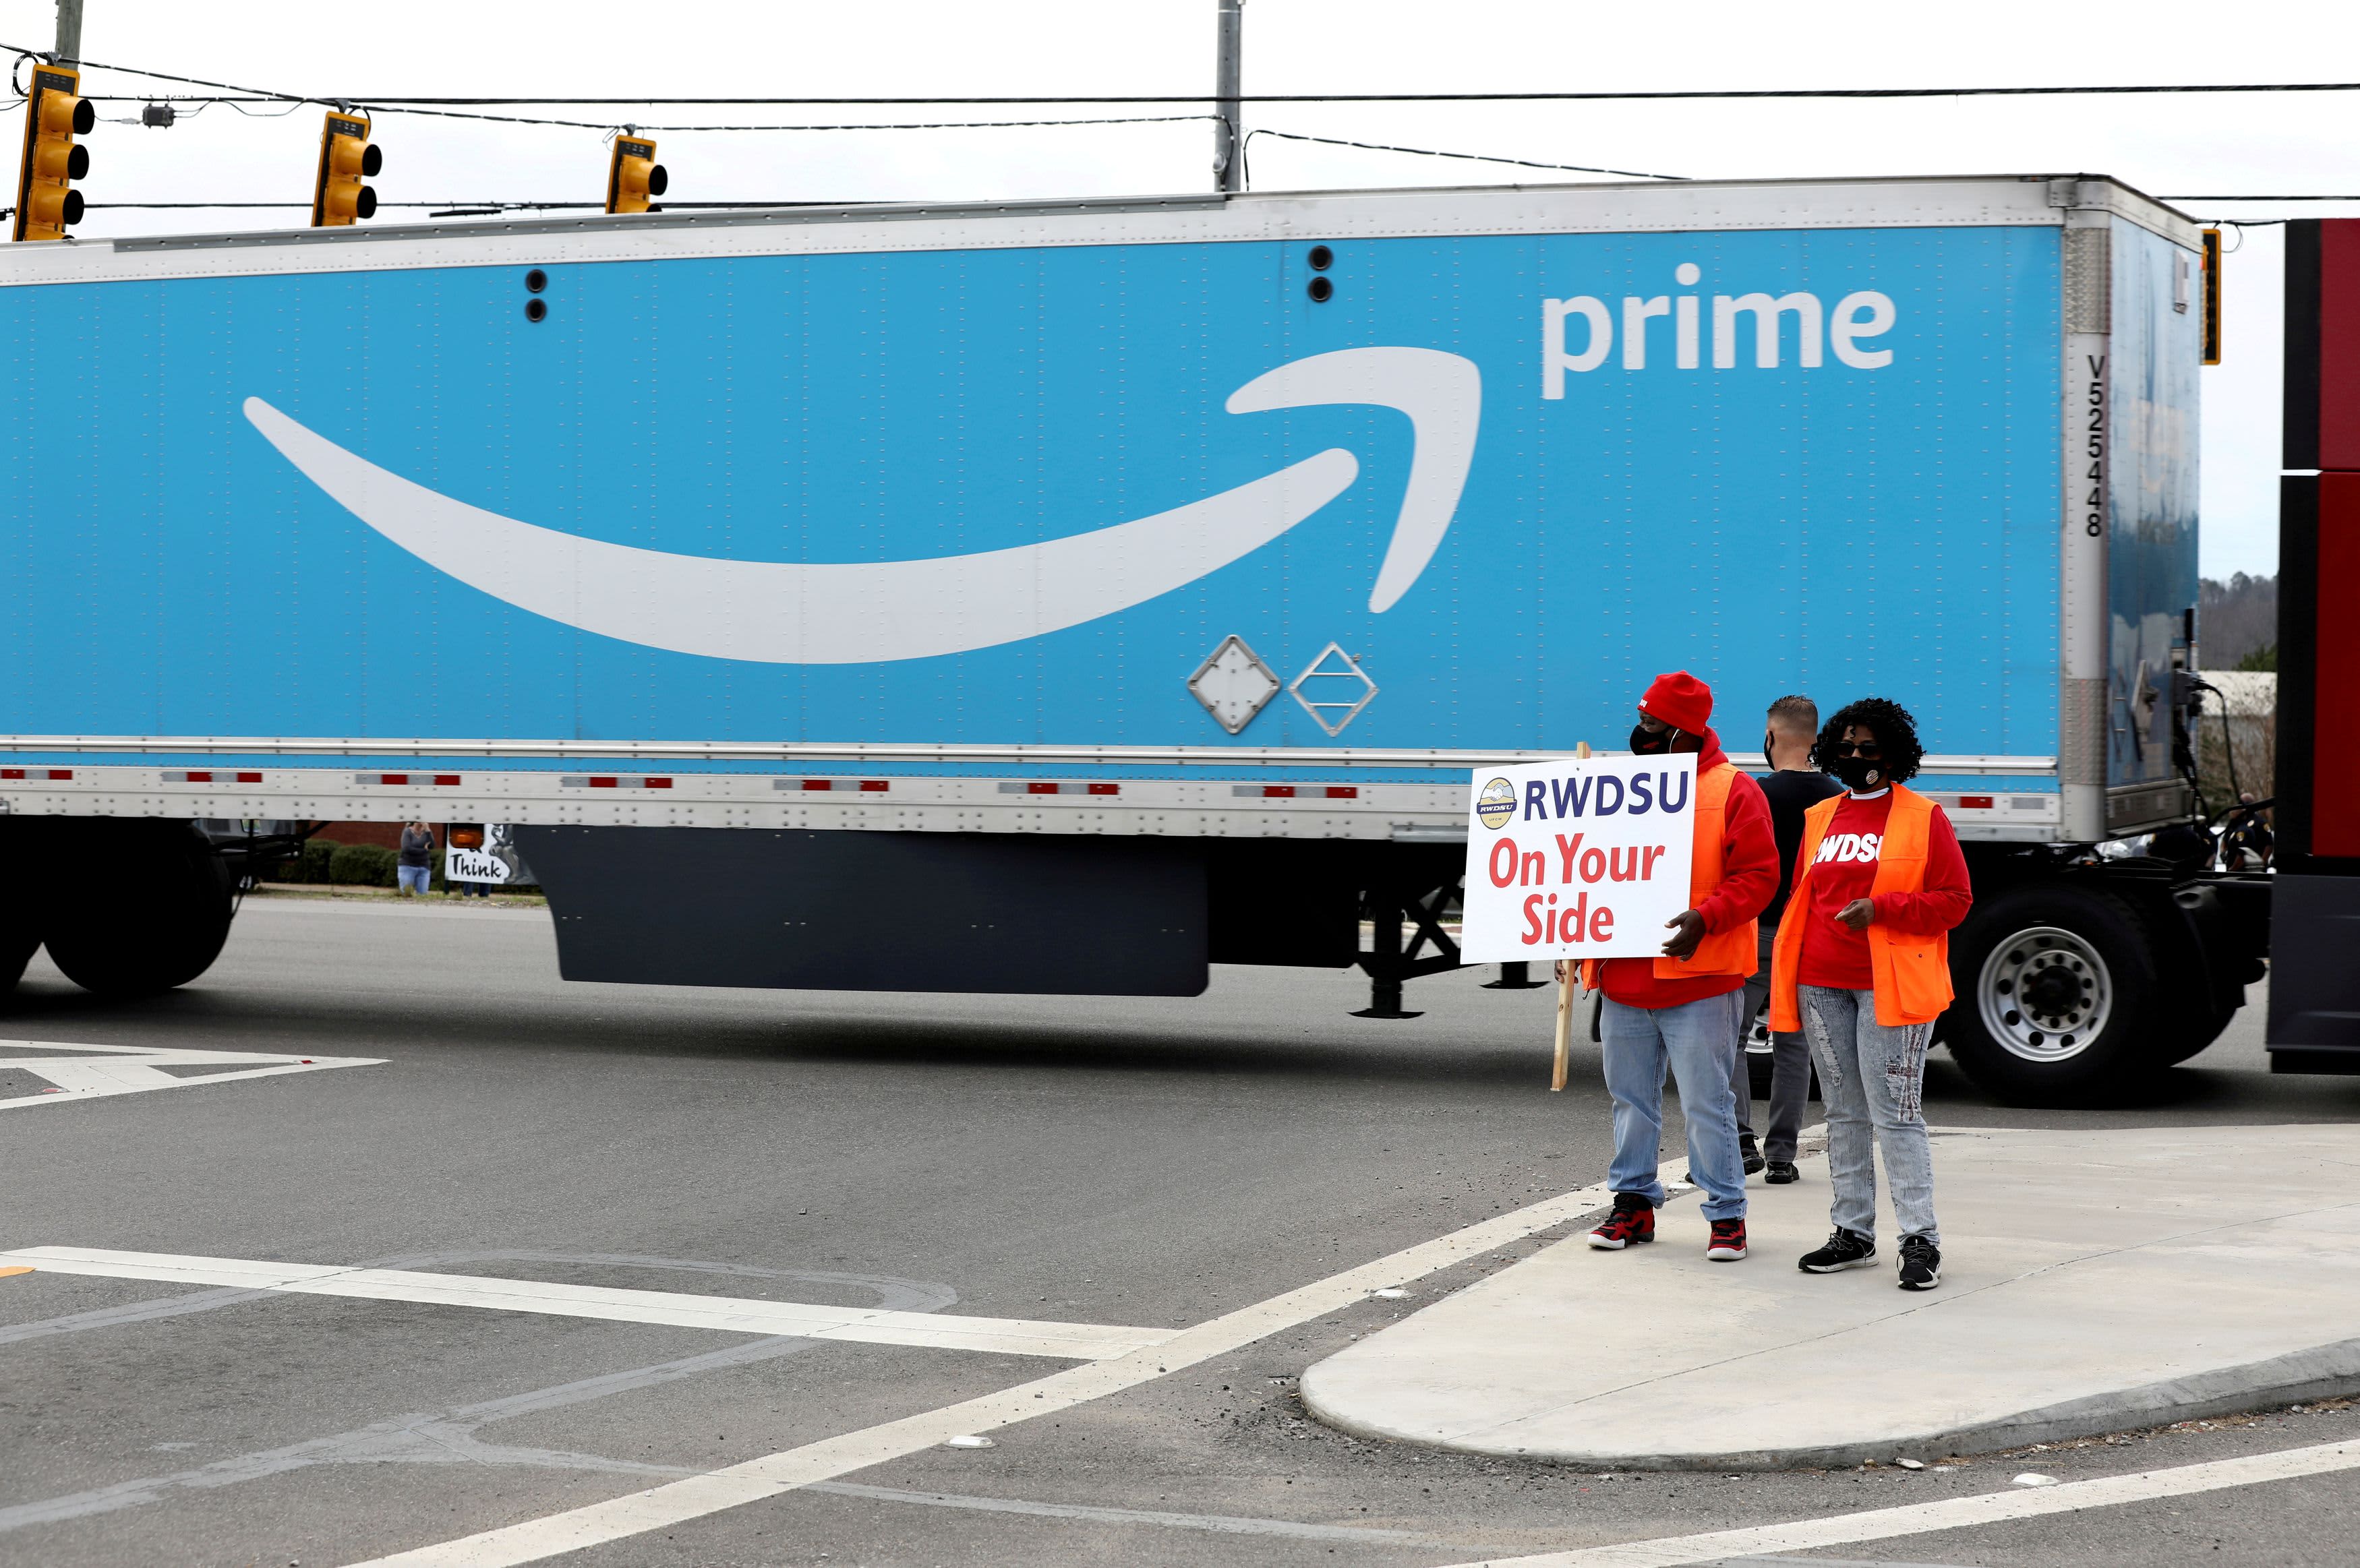 Amazon warehouse workers in Alabama will get another chance to vote to unionize